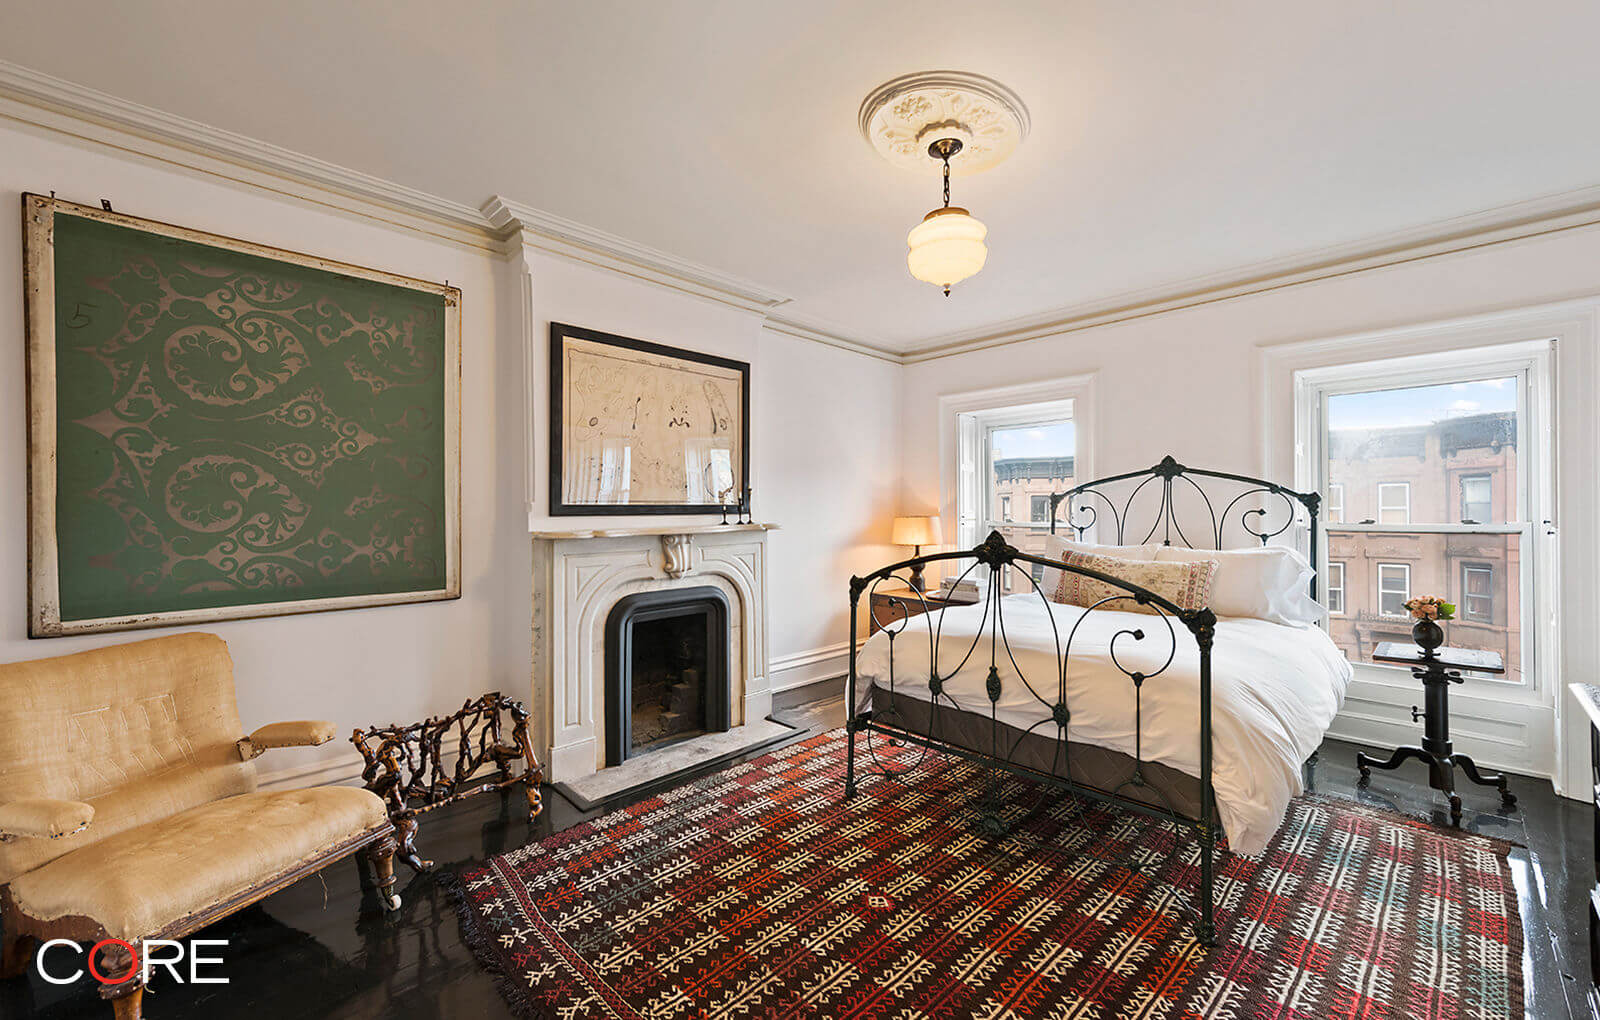 Brooklyn Homes for Sale in Park Slope at 178 Garfield Street